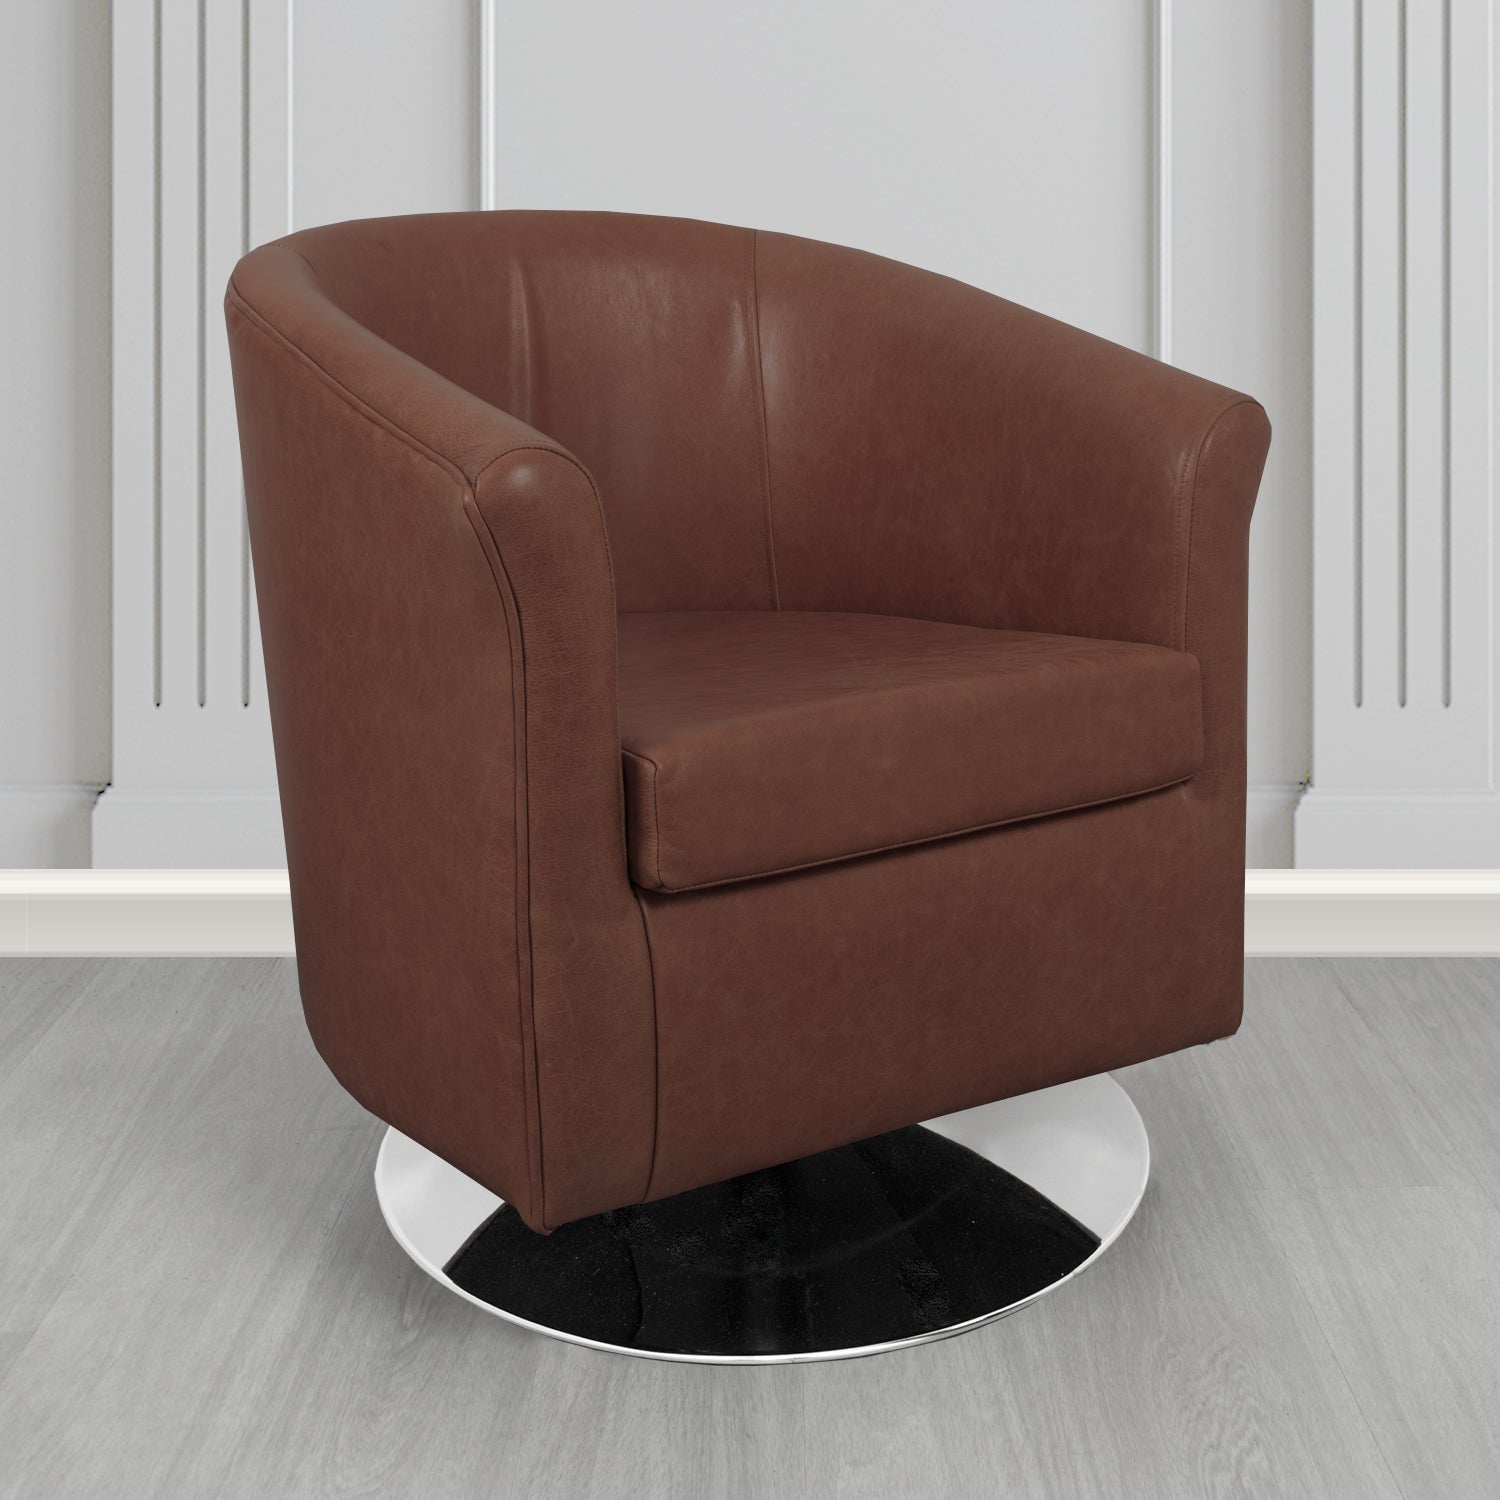 Tuscany Swivel Tub Chair in Crib 5 Old English Red Brown Genuine Leather - The Tub Chair Shop